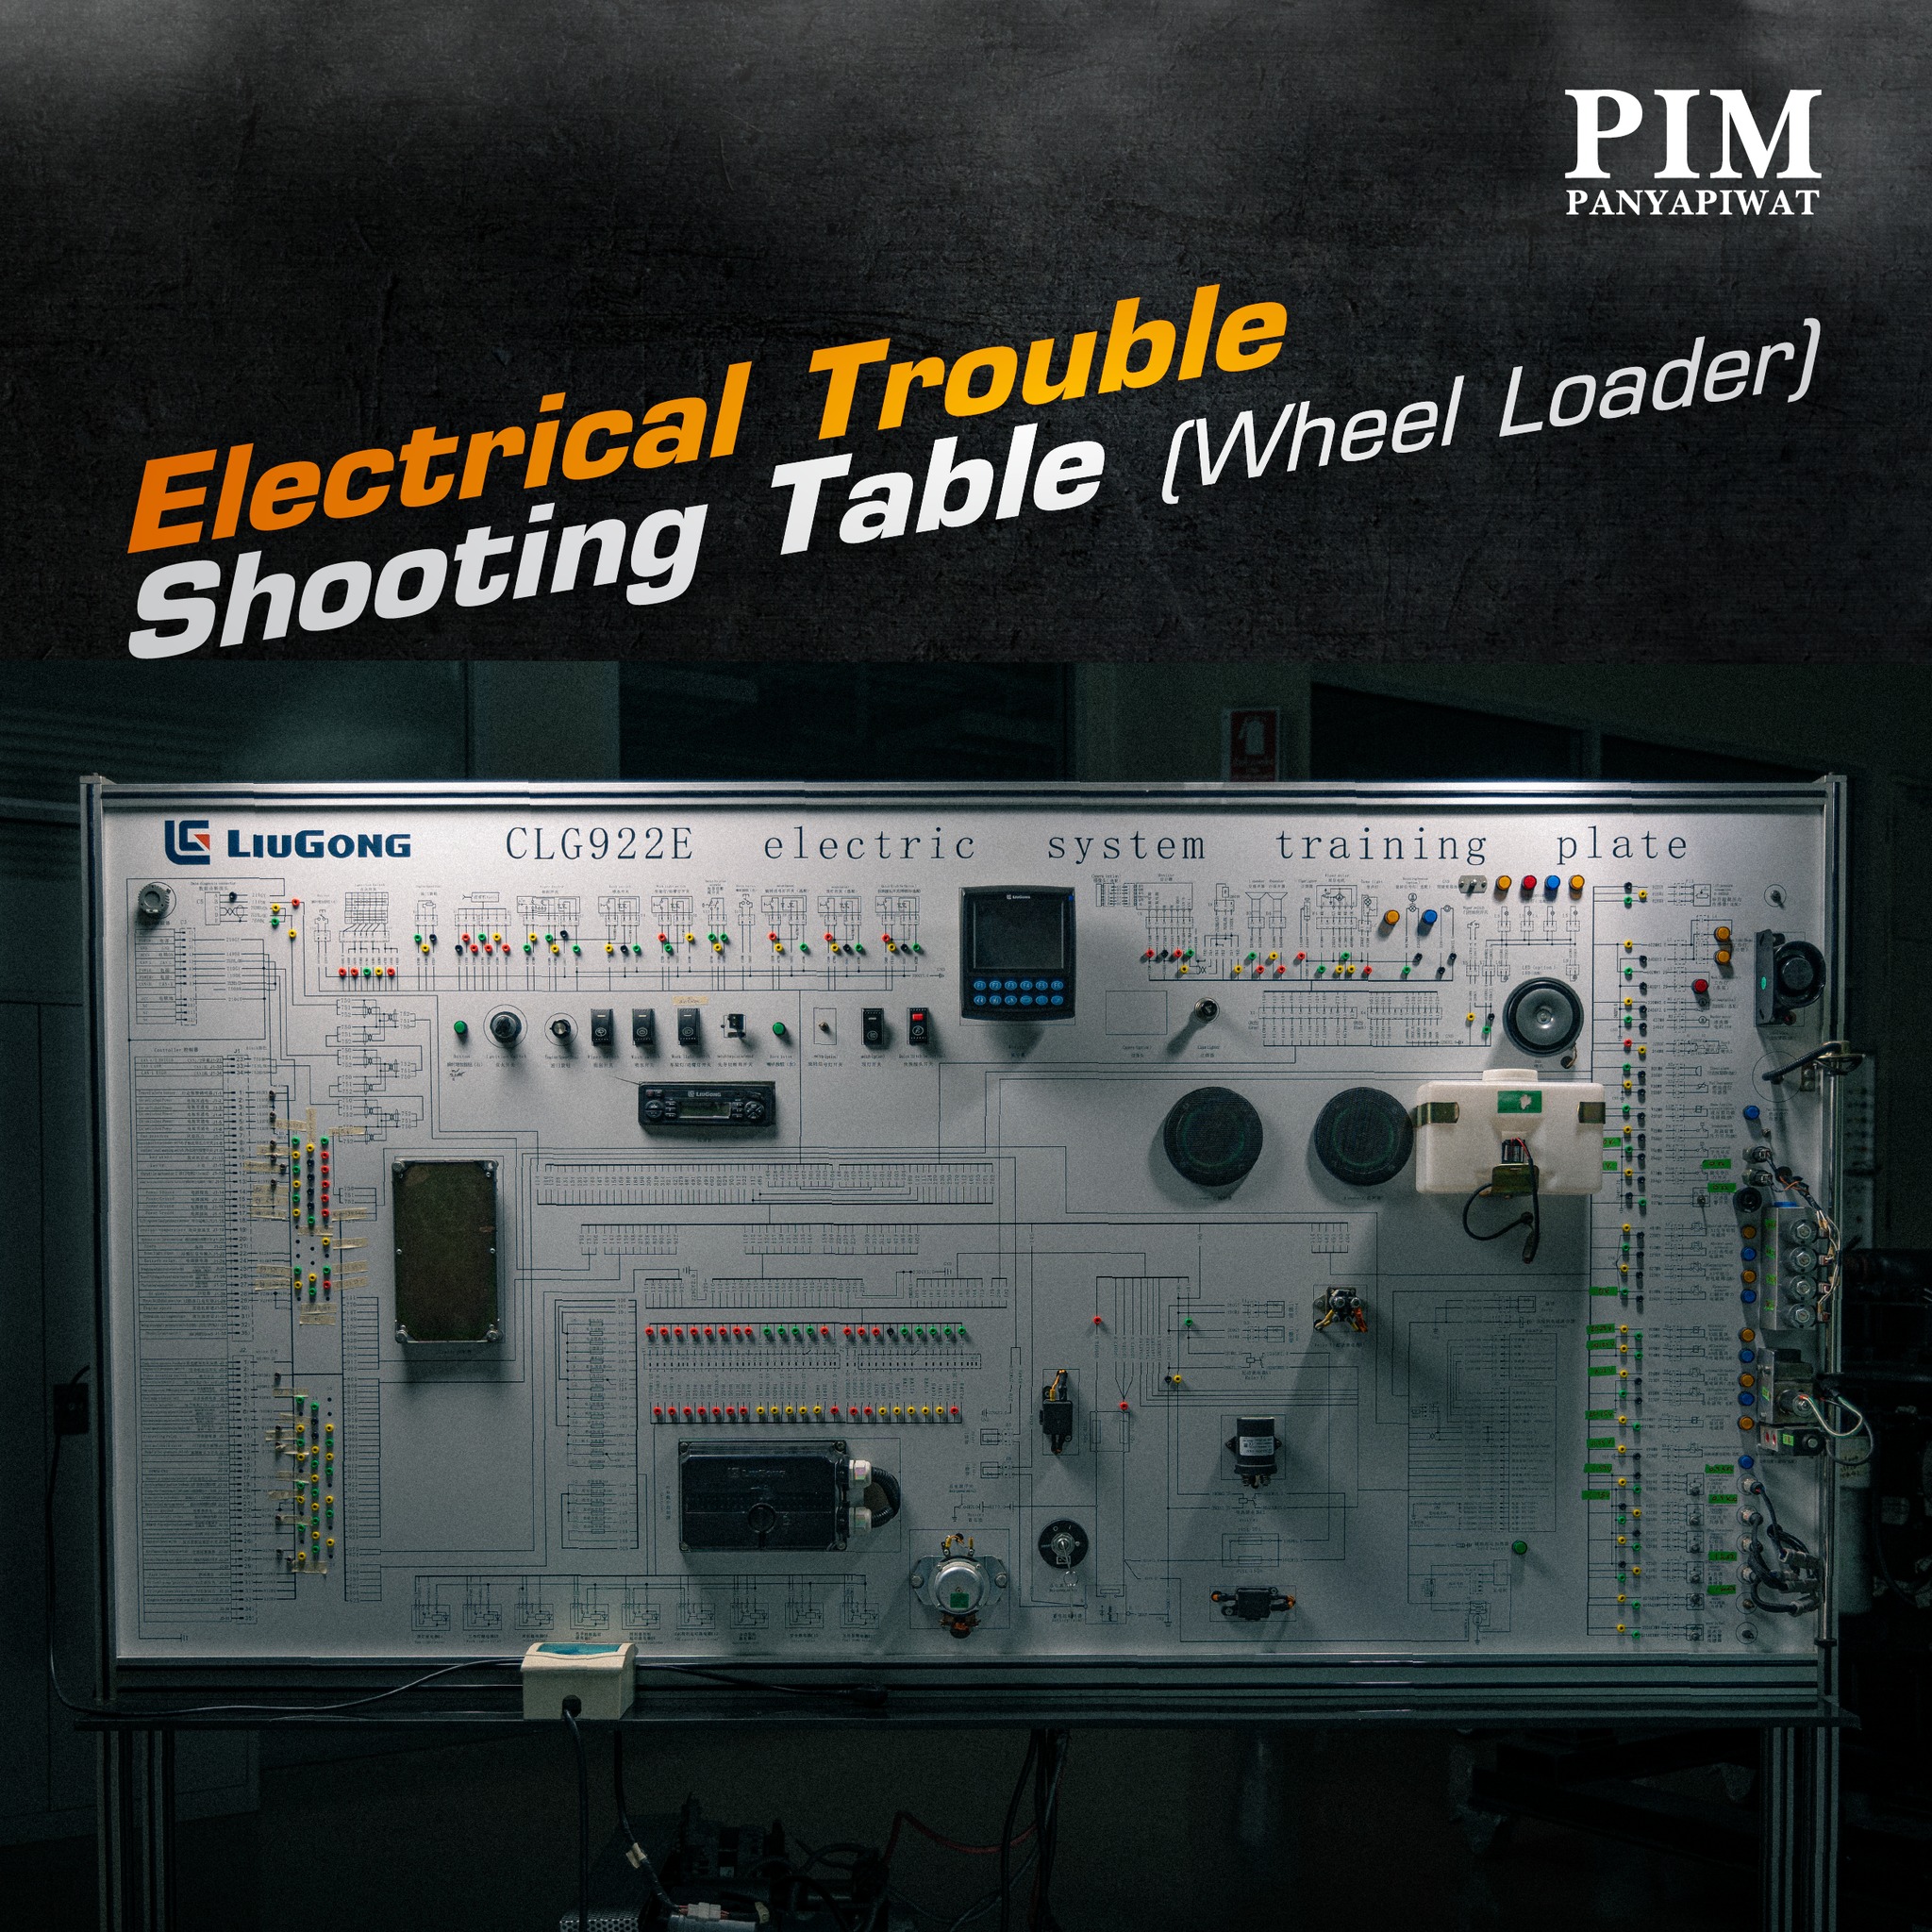 Electrical Trouble Shooting Table (Wheel Loader)